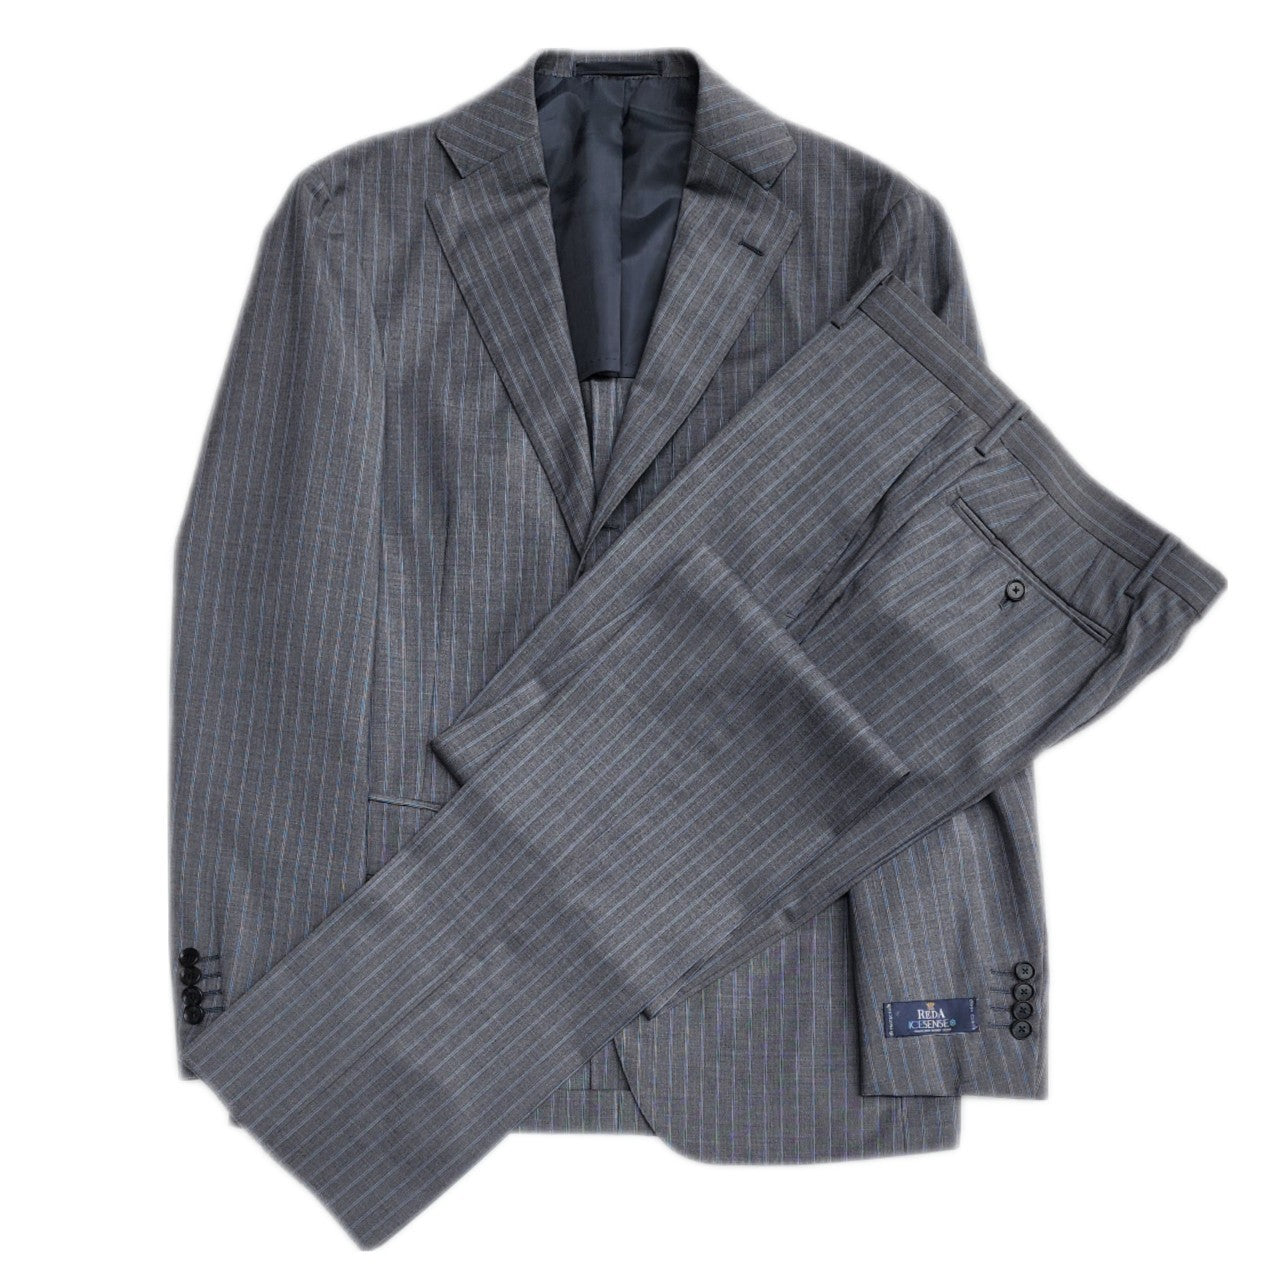 RING JACKET / GREY STRIPED WOOL SUIT – COLONY CLOTHING